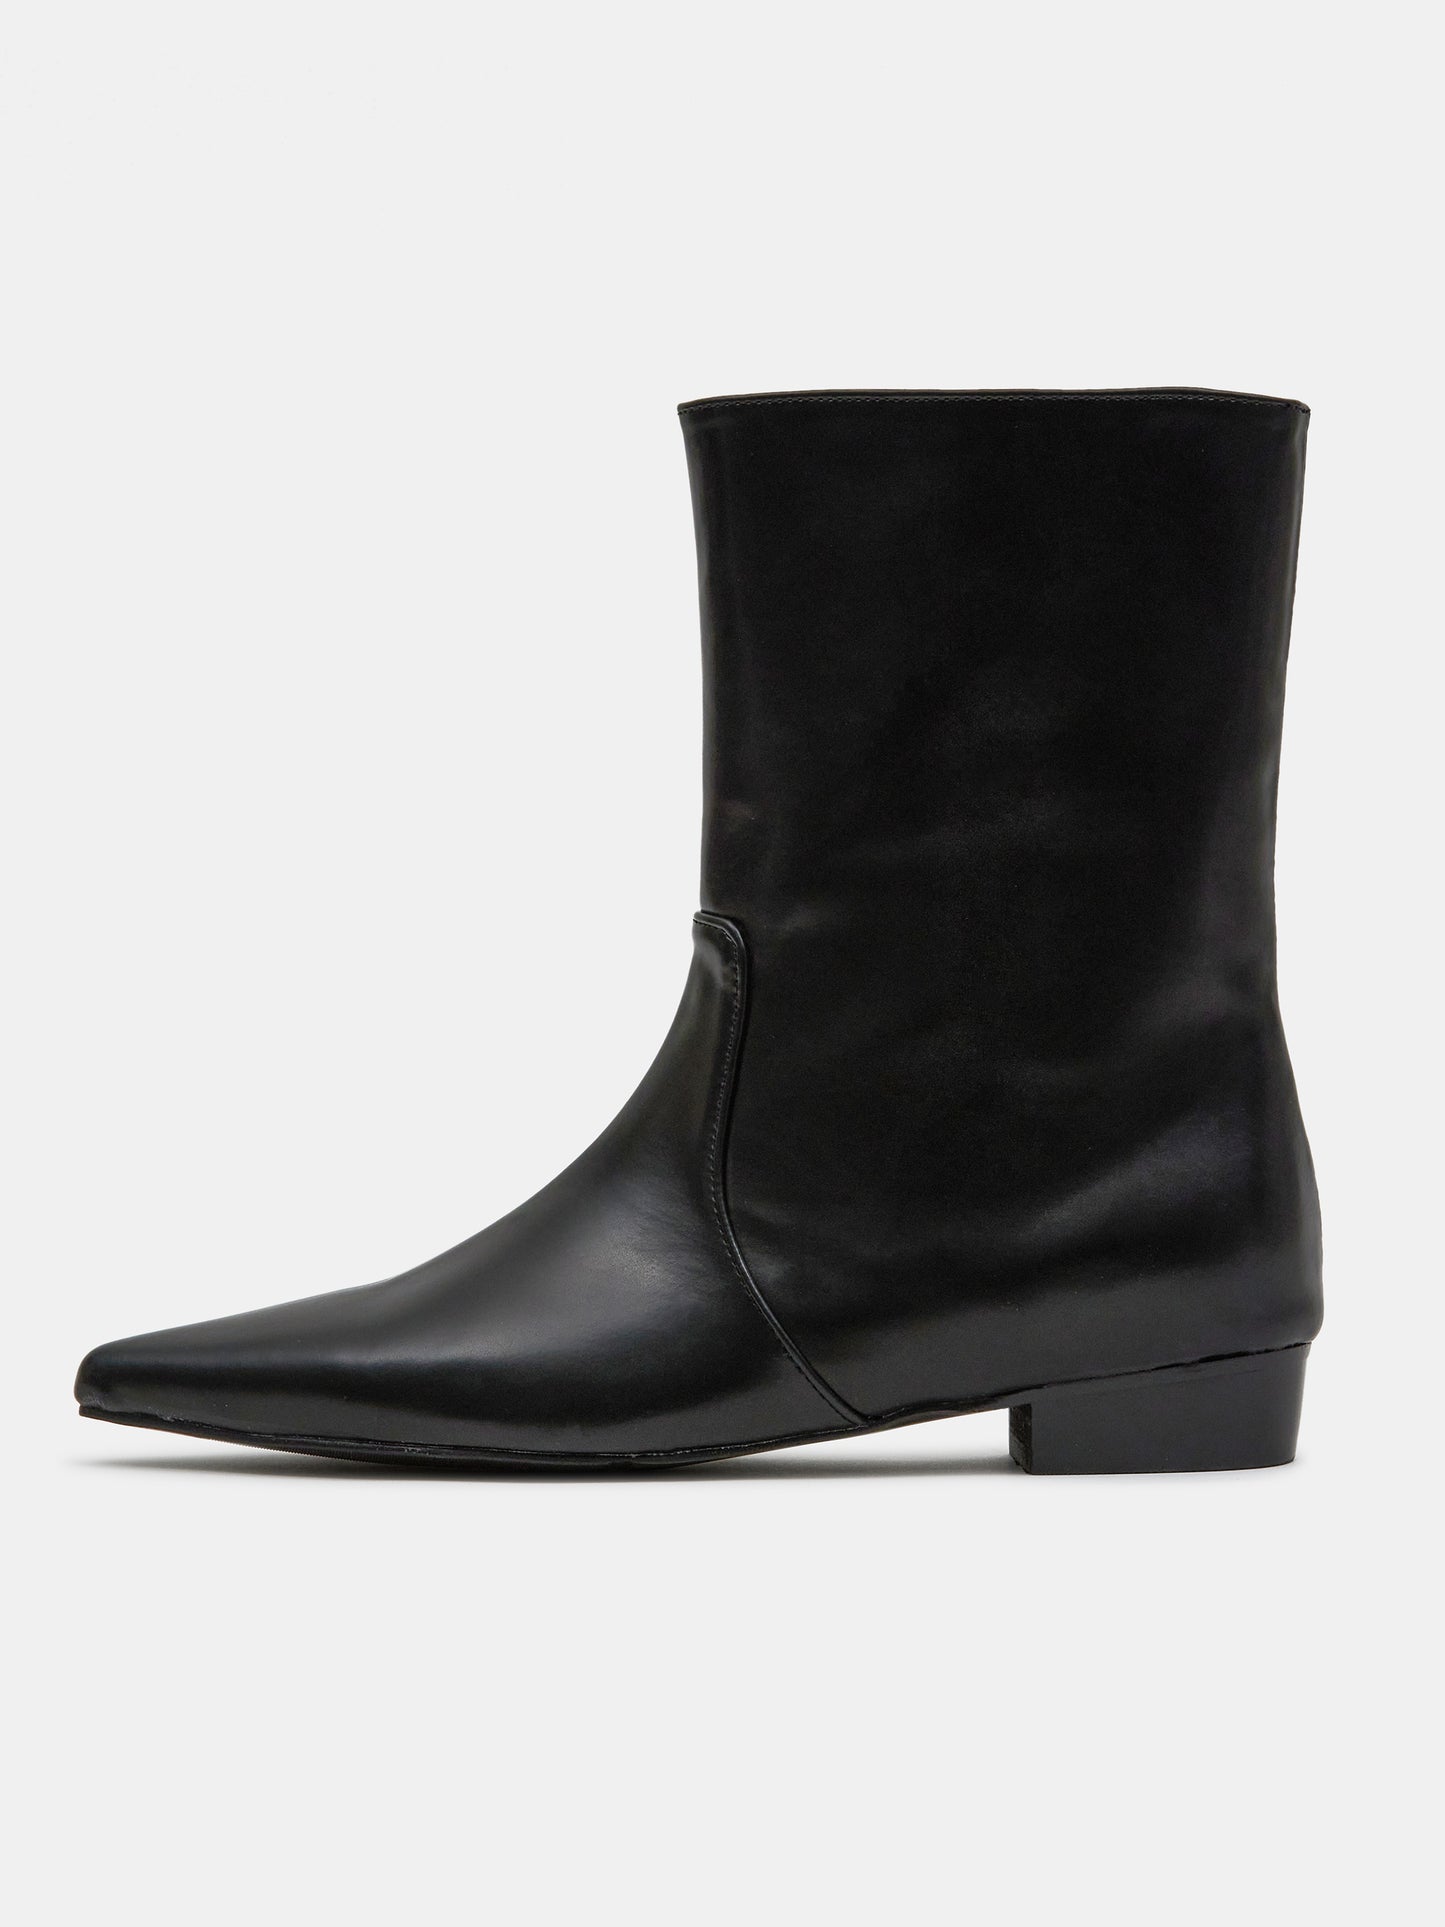 Pointed Mid Calf Boots, Black